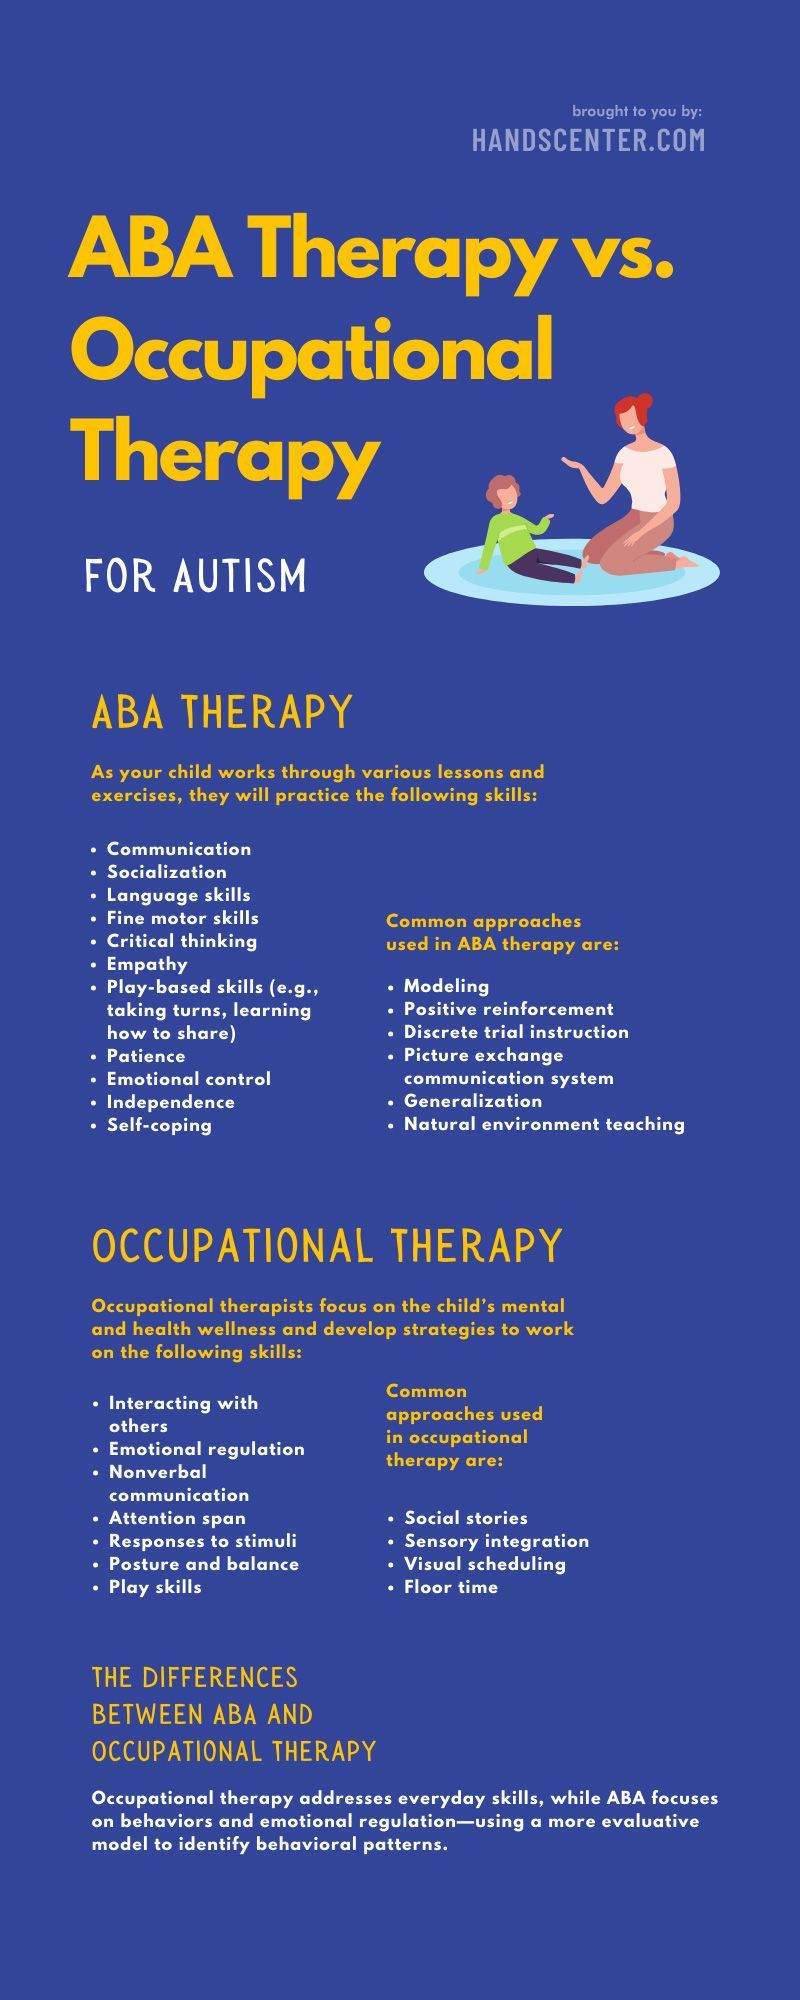 ABA Therapy vs. Occupational Therapy for Autism